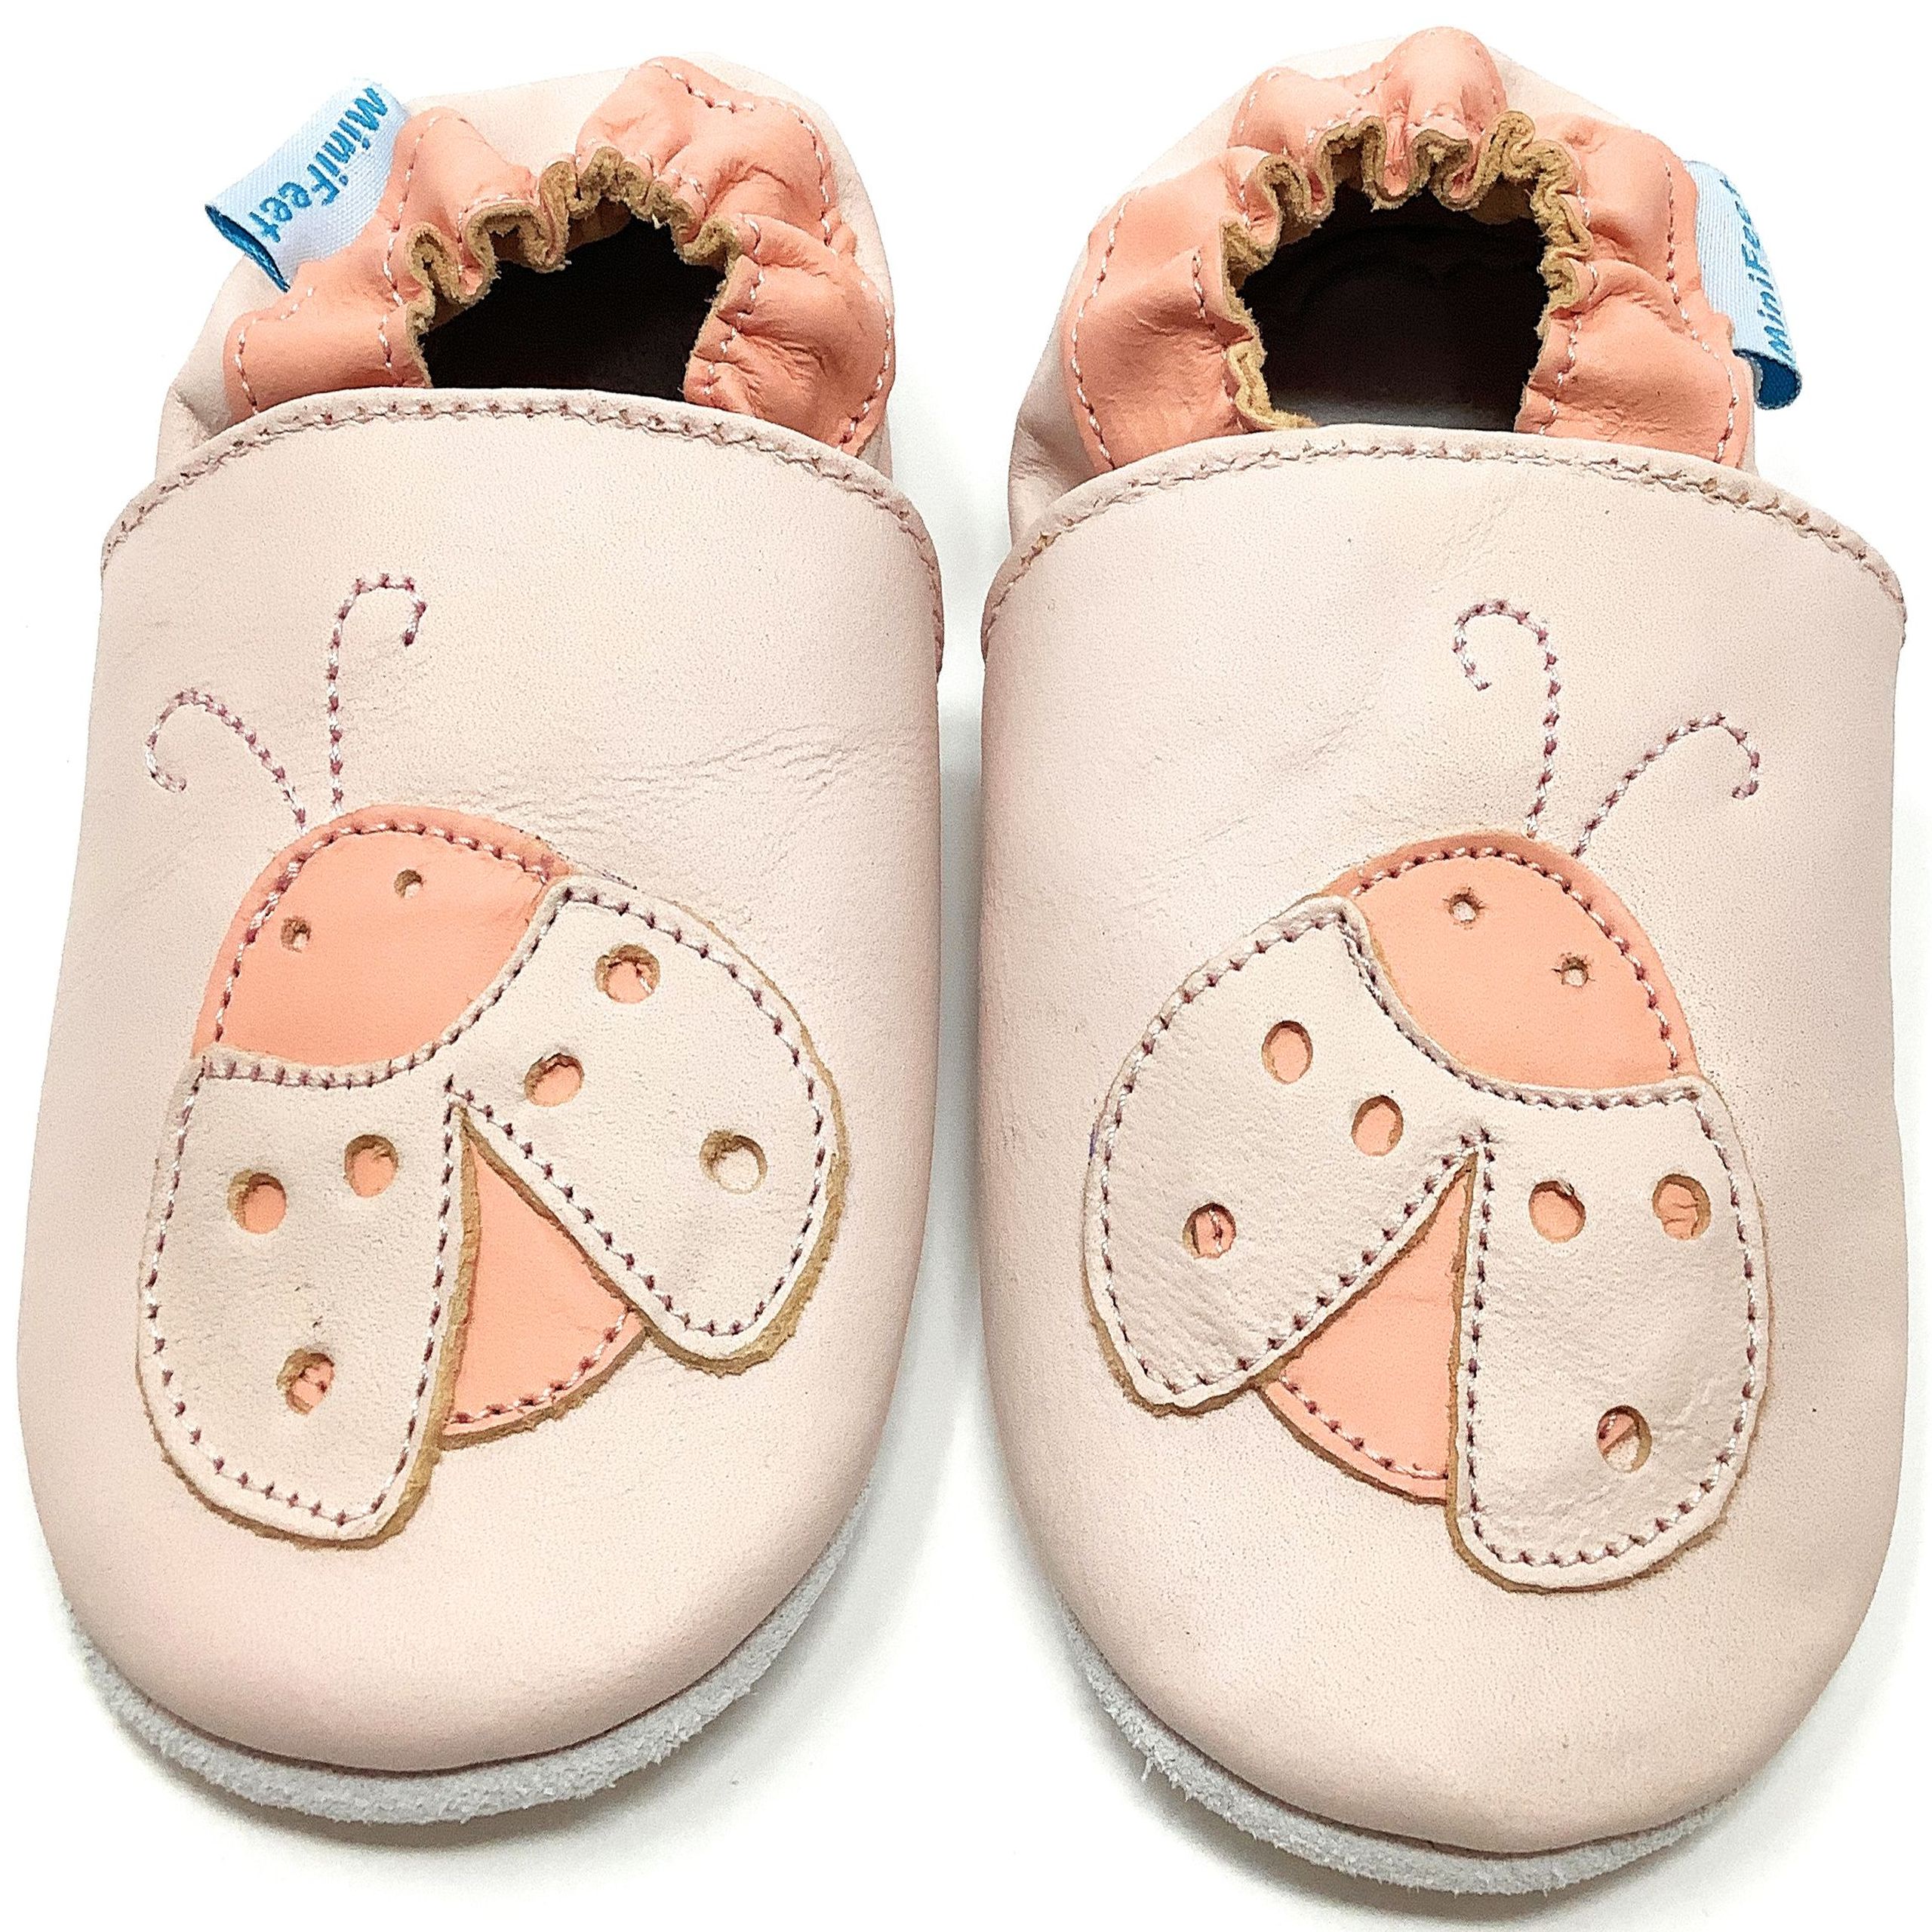 6-12 Baby Girl Sandals 0-6 MiniFeet Soft Leather Baby Shoes 12-18 & 18-24 Months 